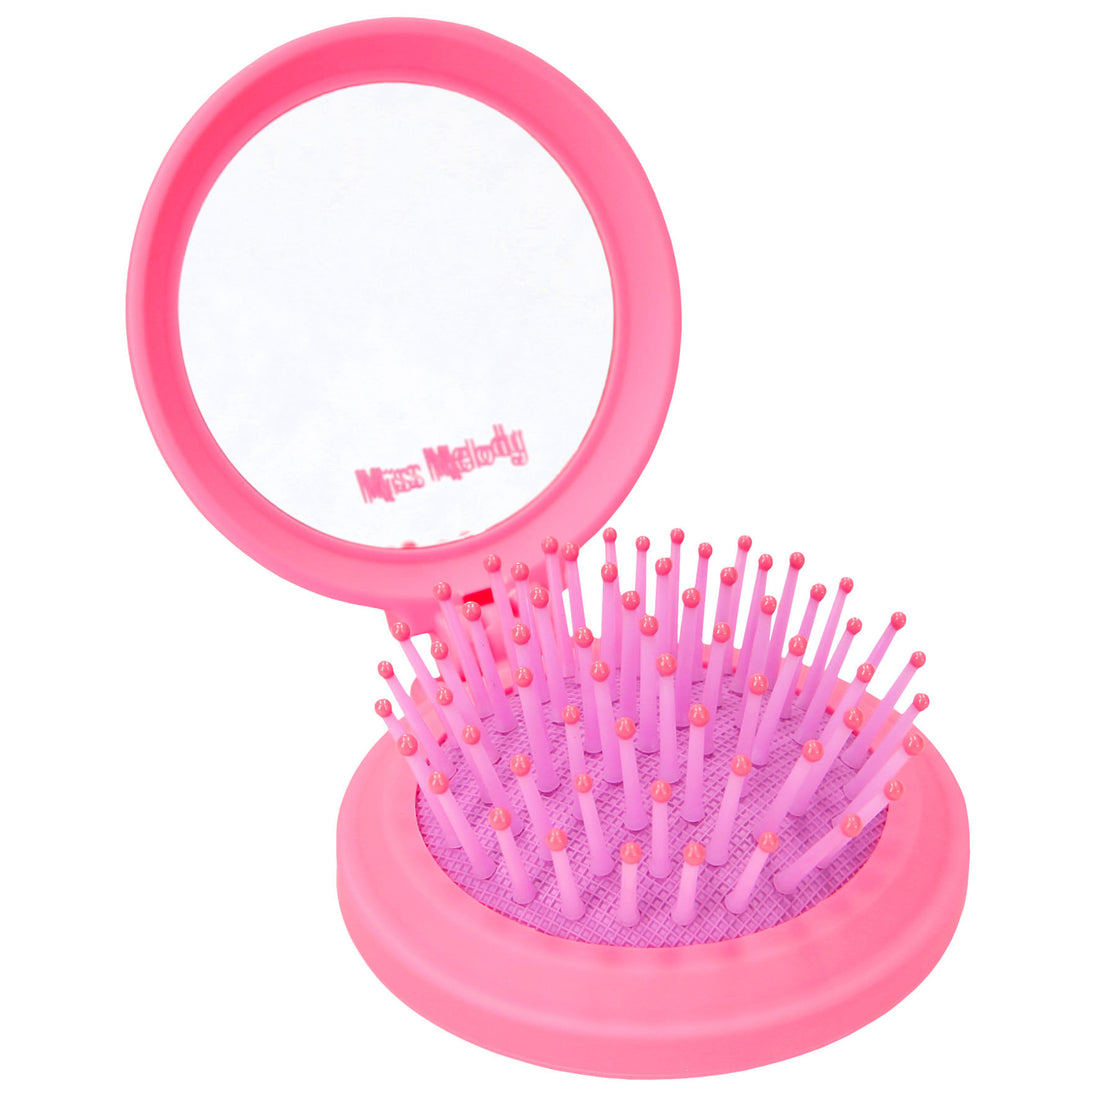 depesche-miss-melody-folding-hairbrush-with-mirror- (1)